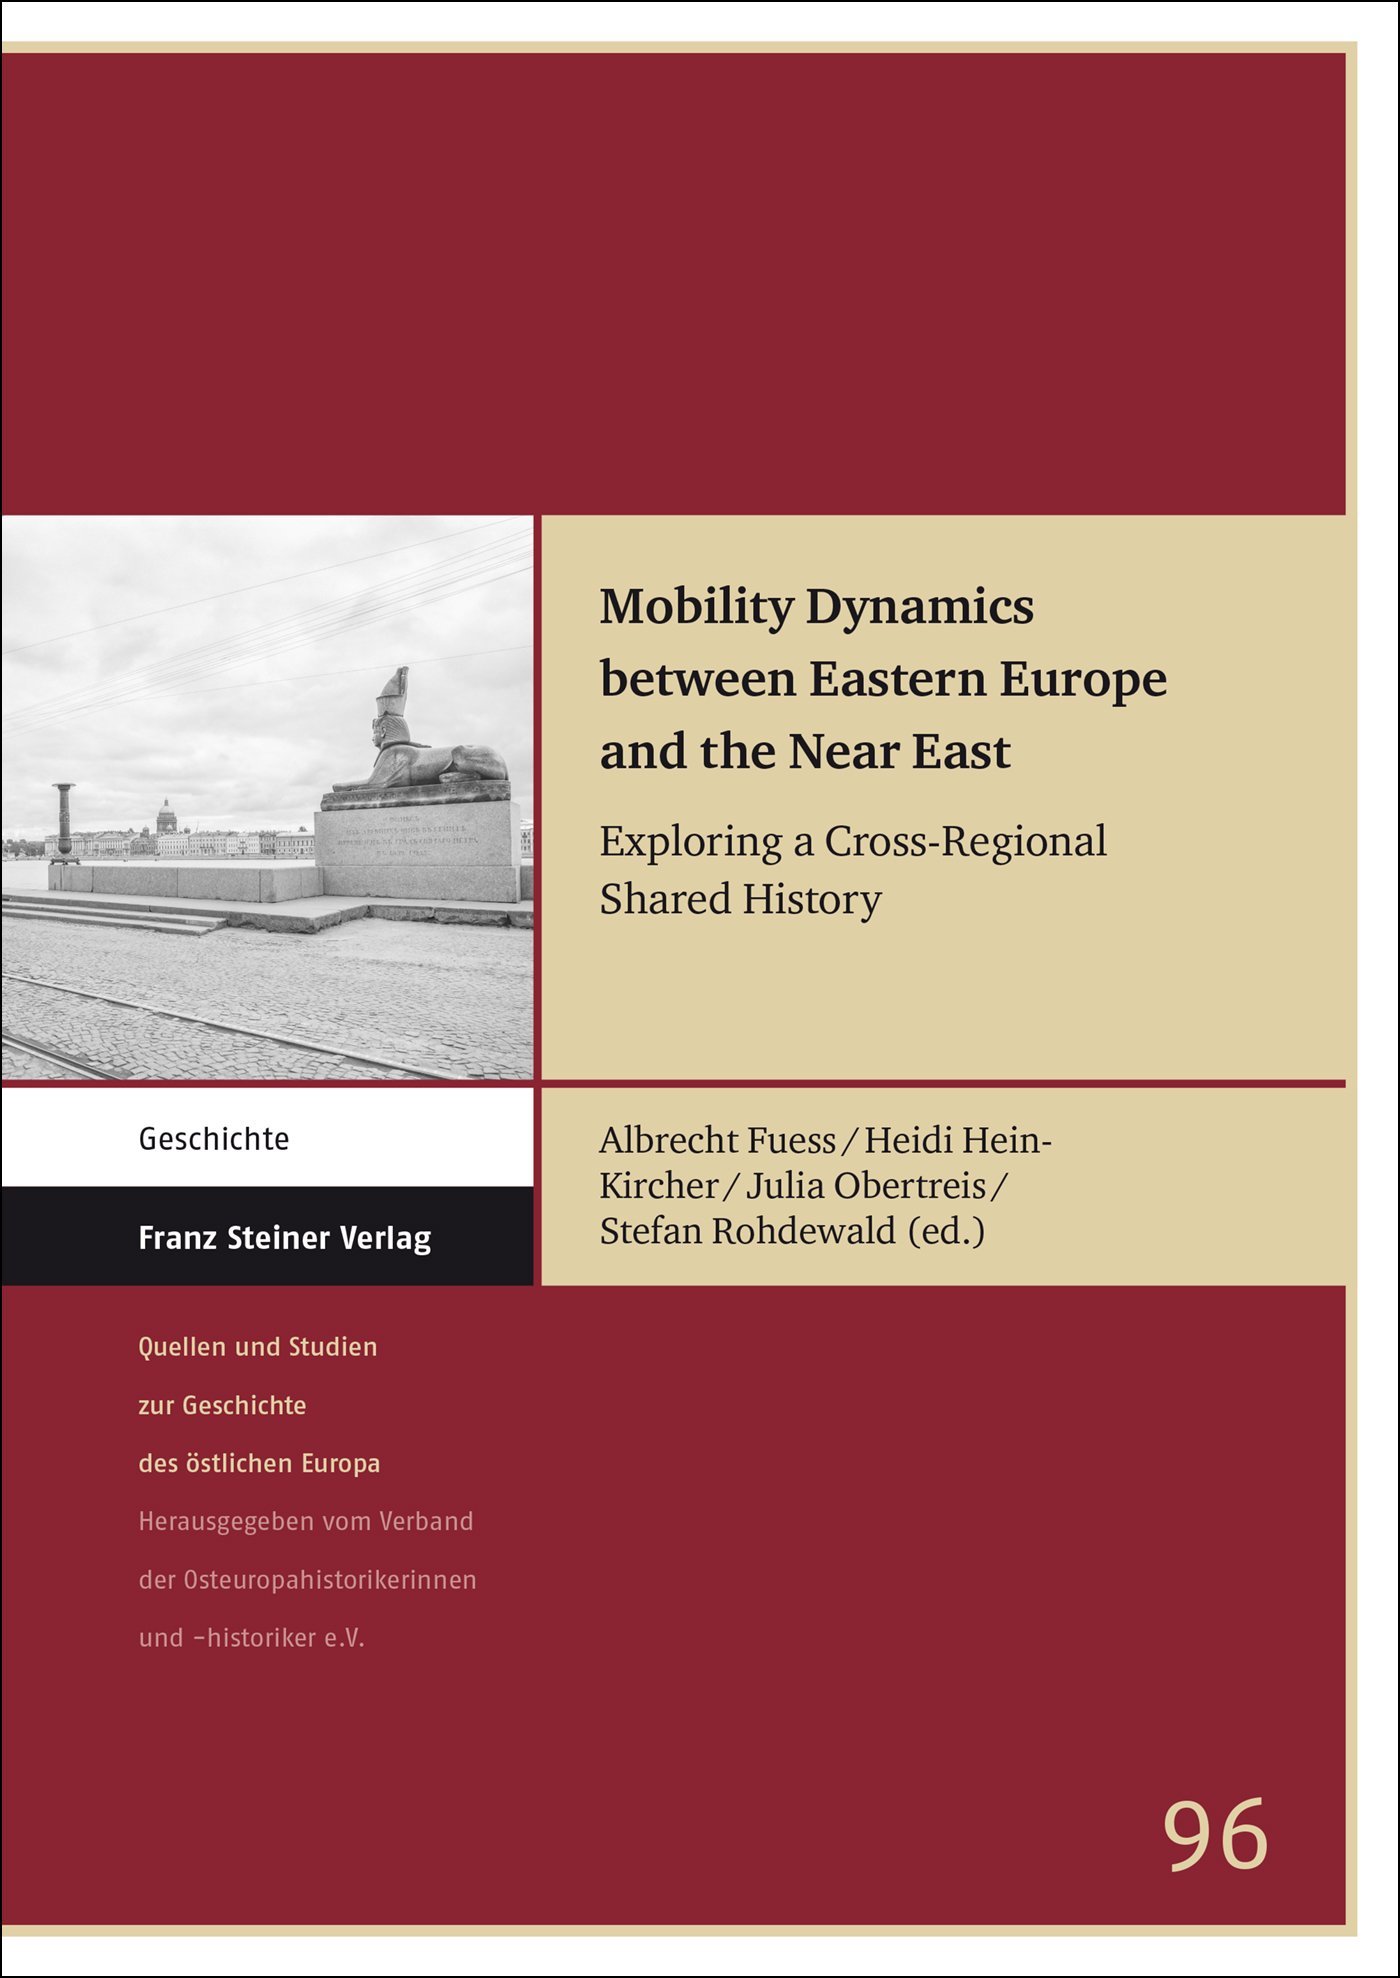 Mobility Dynamics between Eastern Europe and the Near East